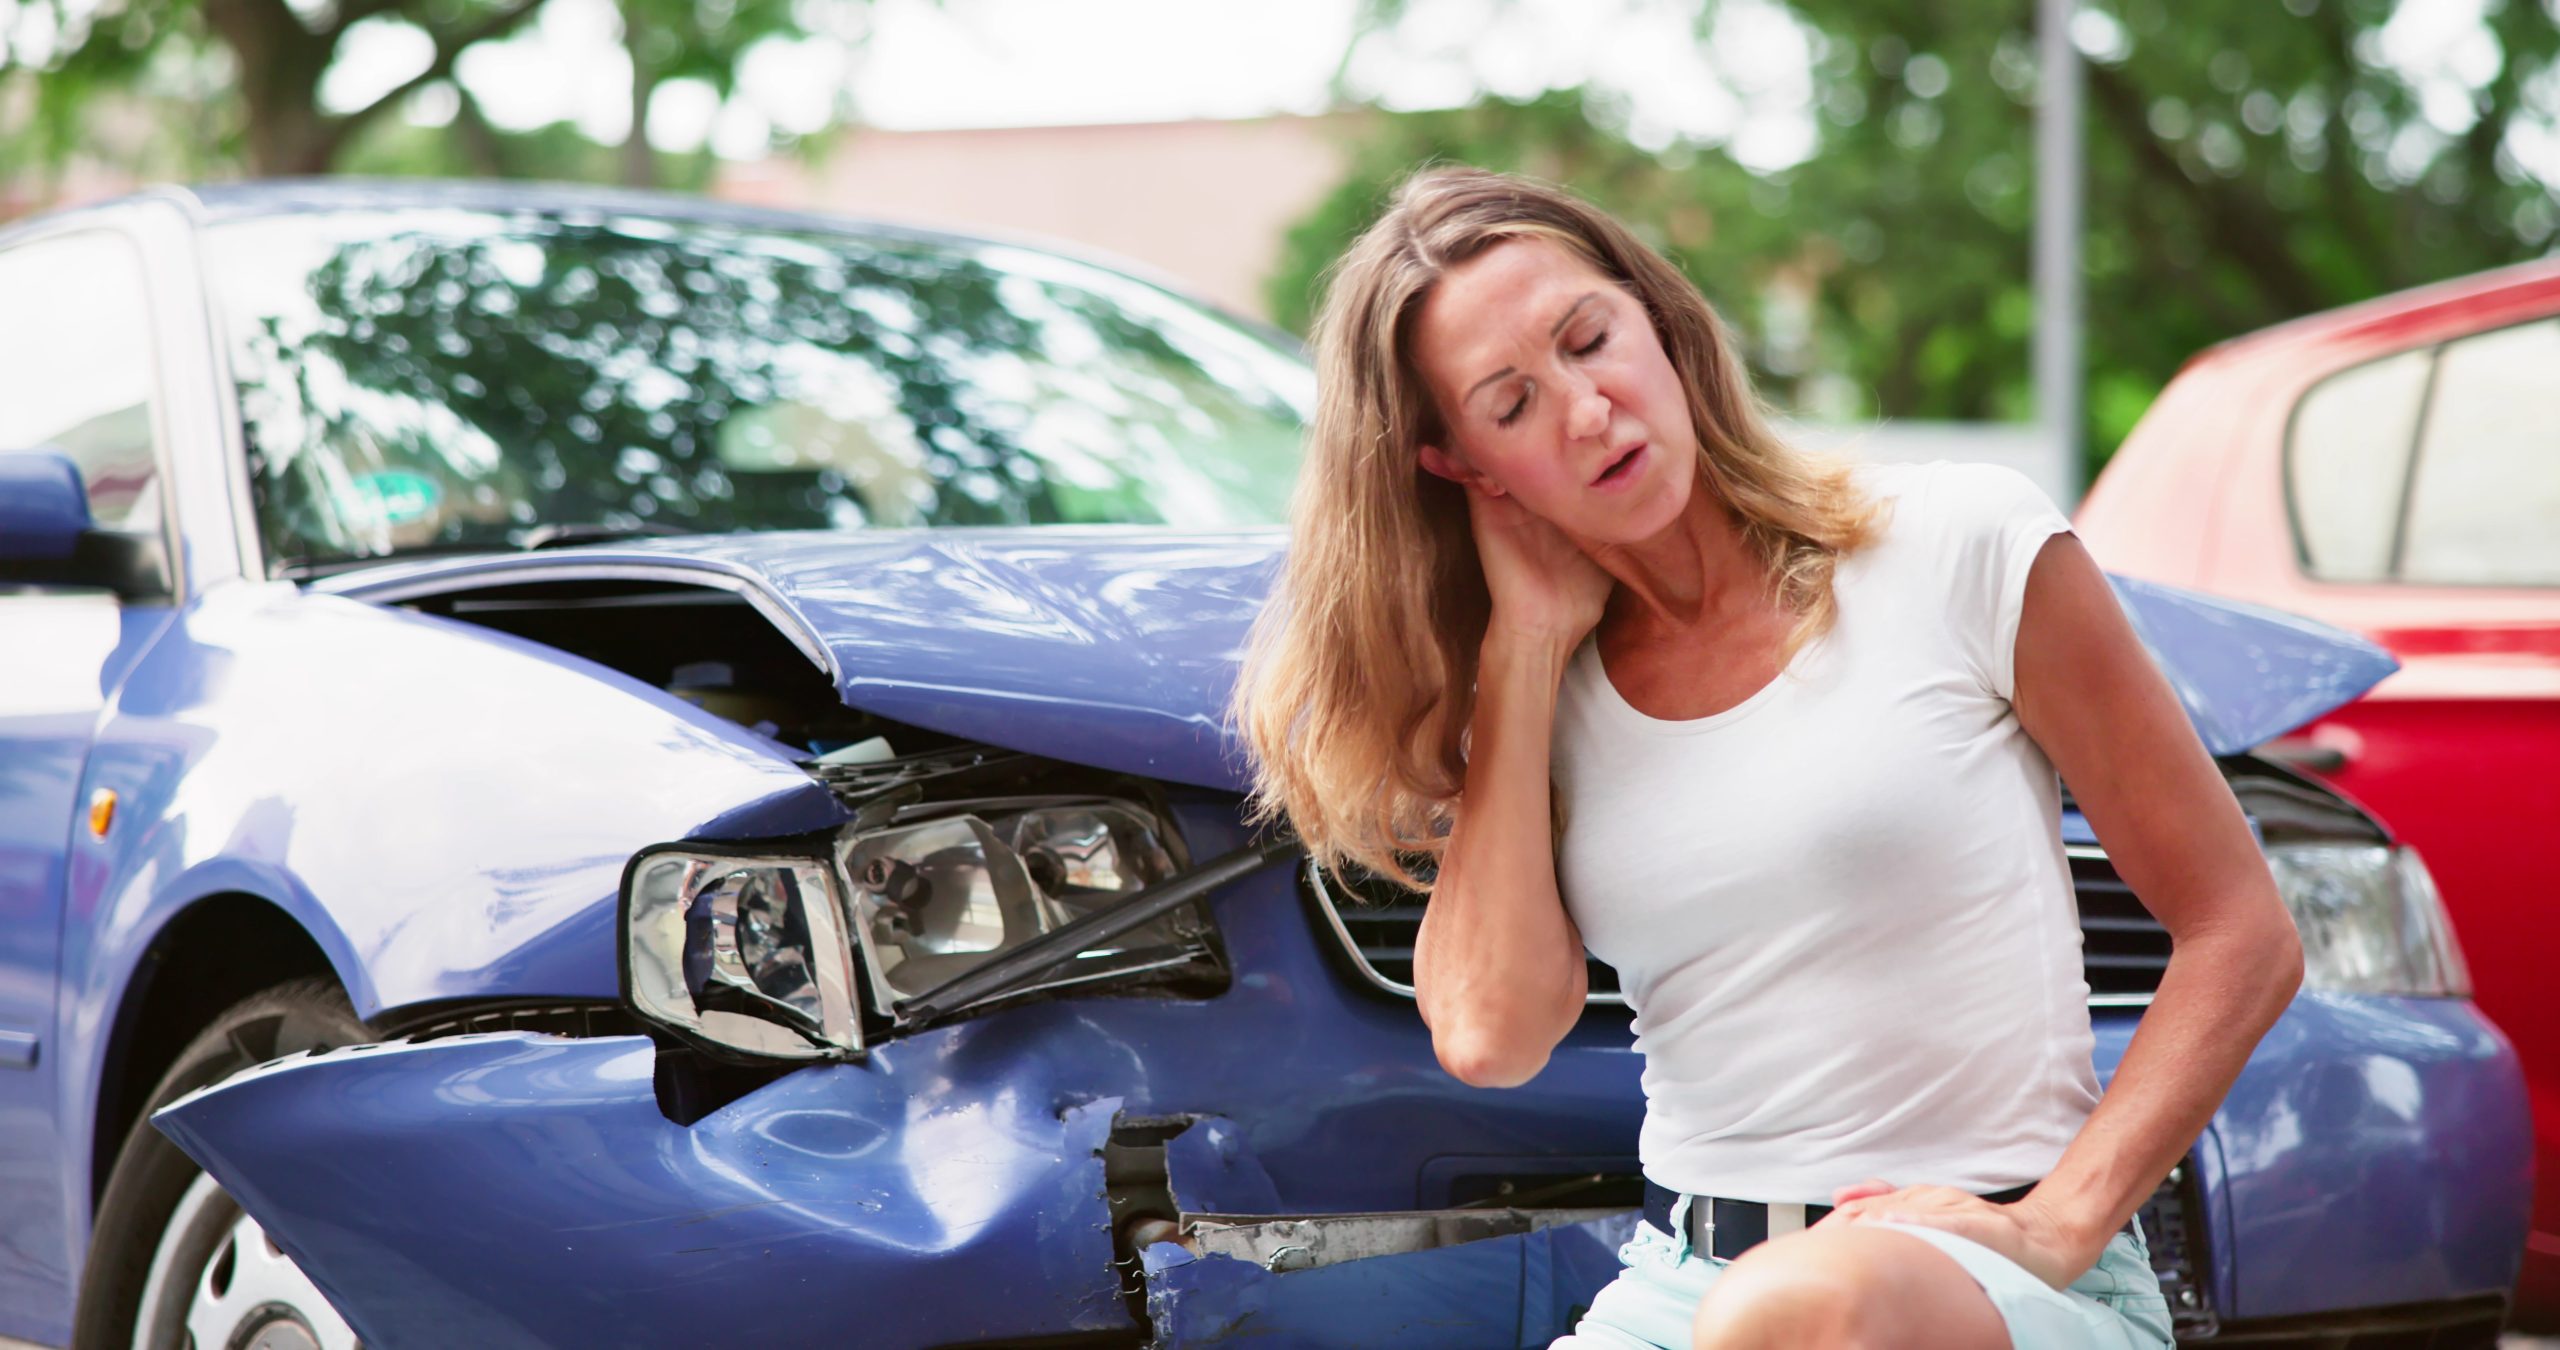 Chiropractic Treatment For Car/Auto Accident Injury Near Snohomish County, WA